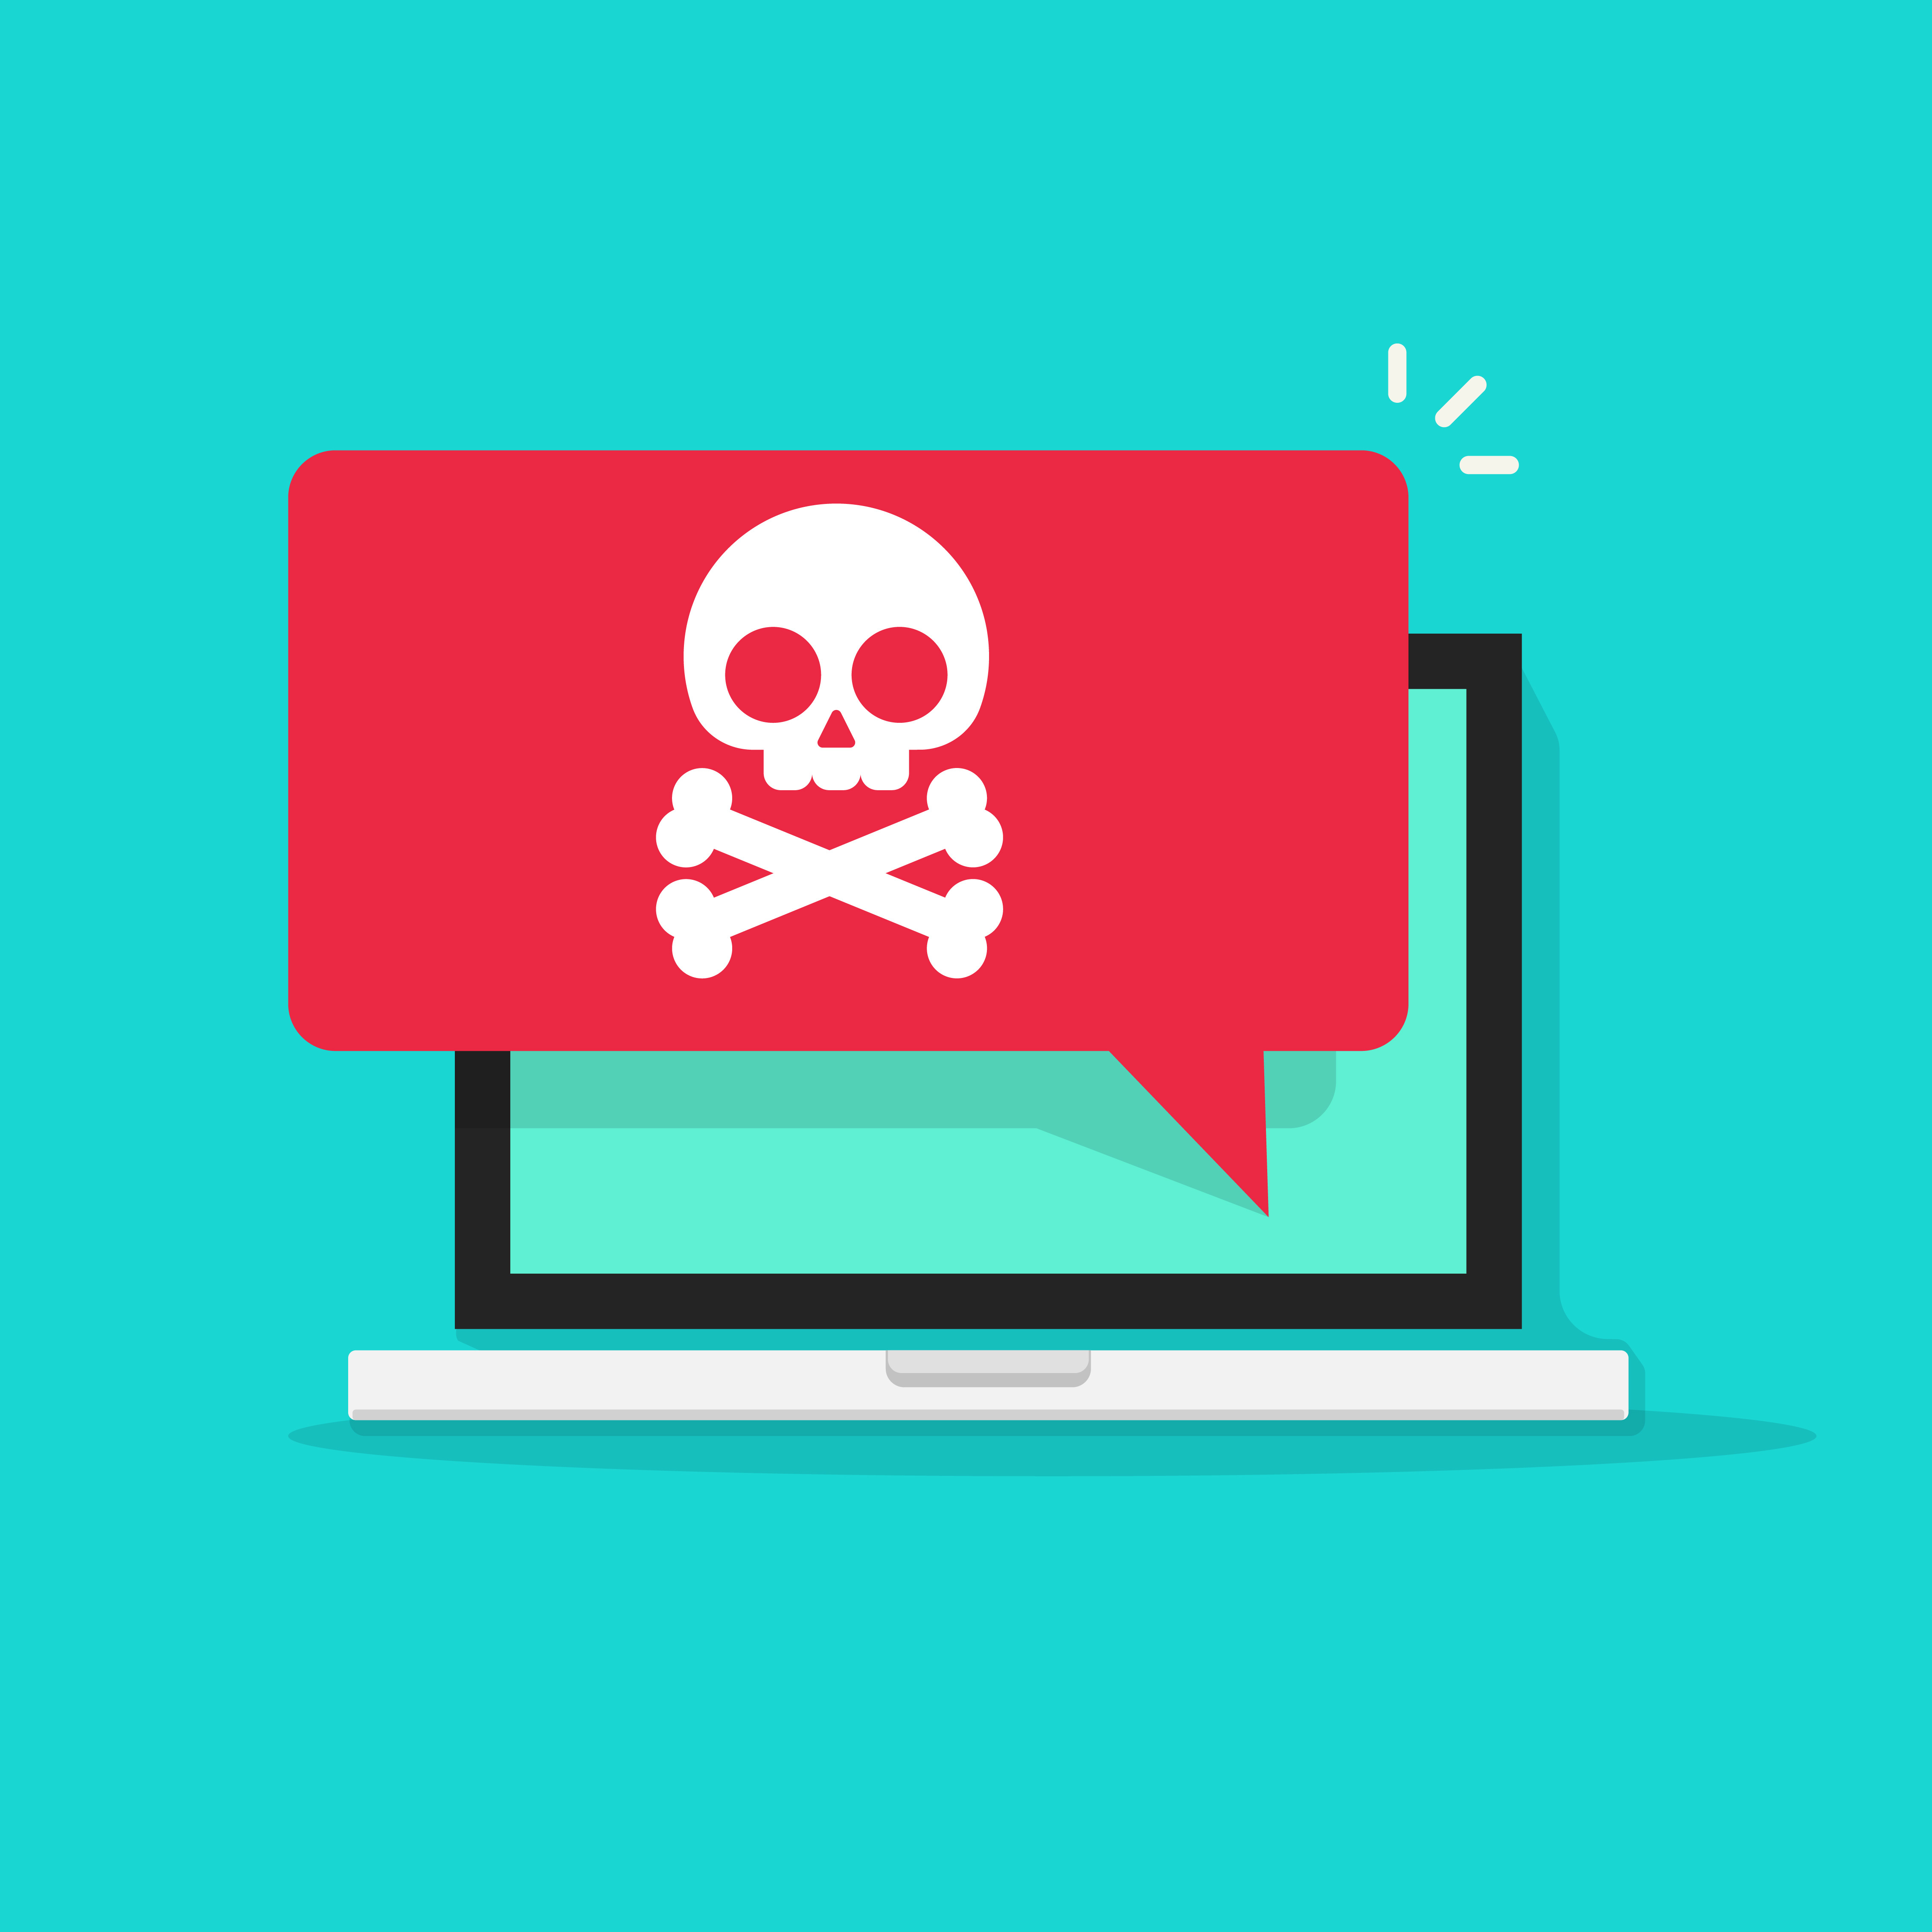 What You Need to Know About Malware